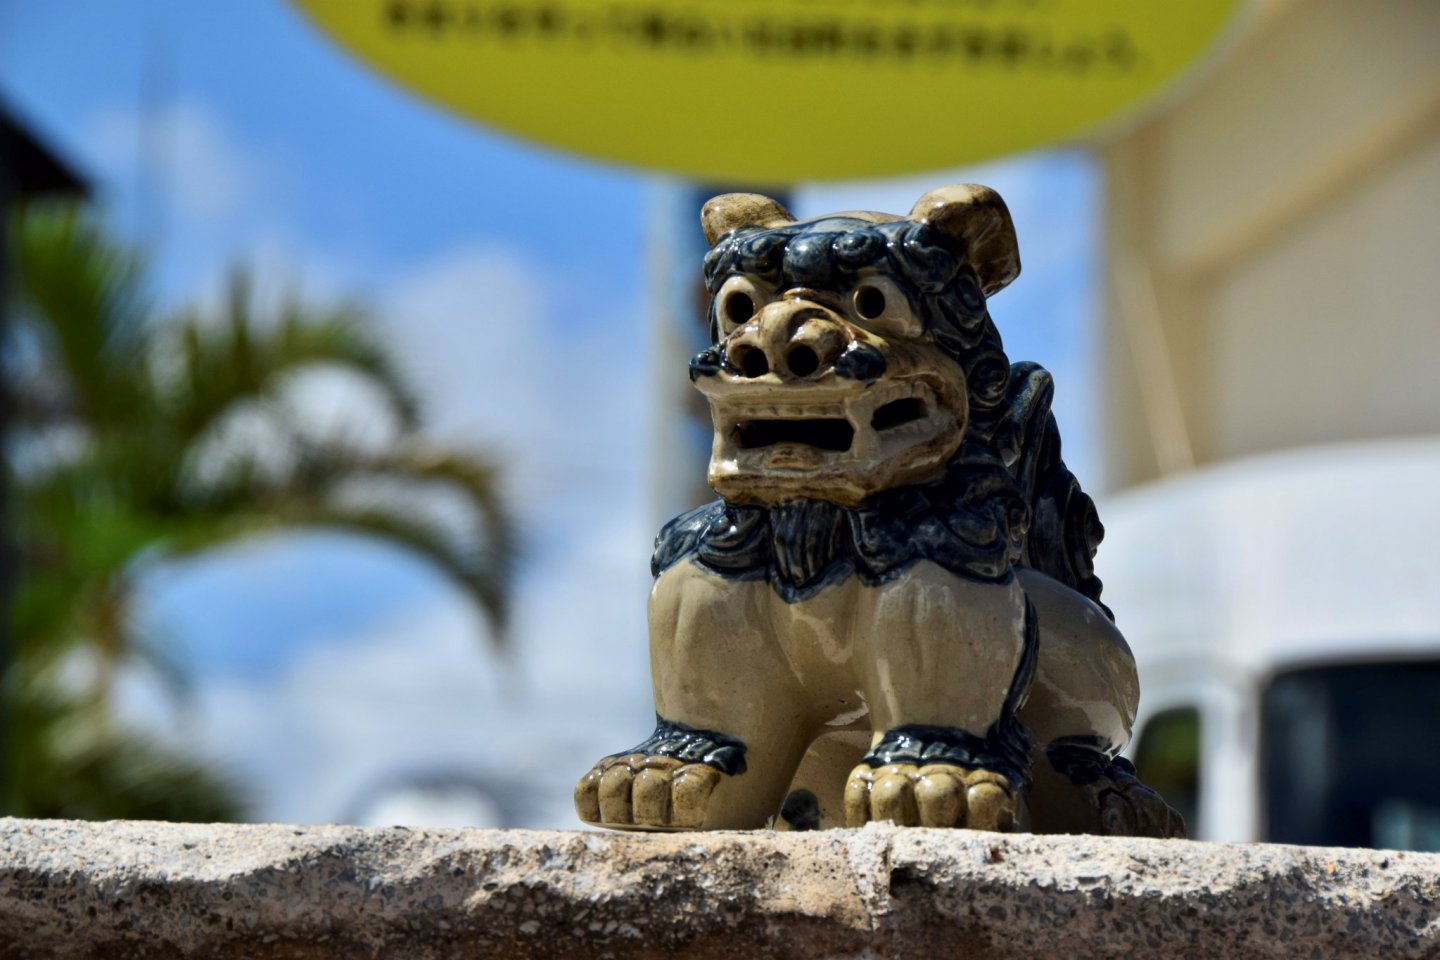 Shisa, the iconic Okinawan Lion Dog, watches over the rustic laneways at Aharen Beach